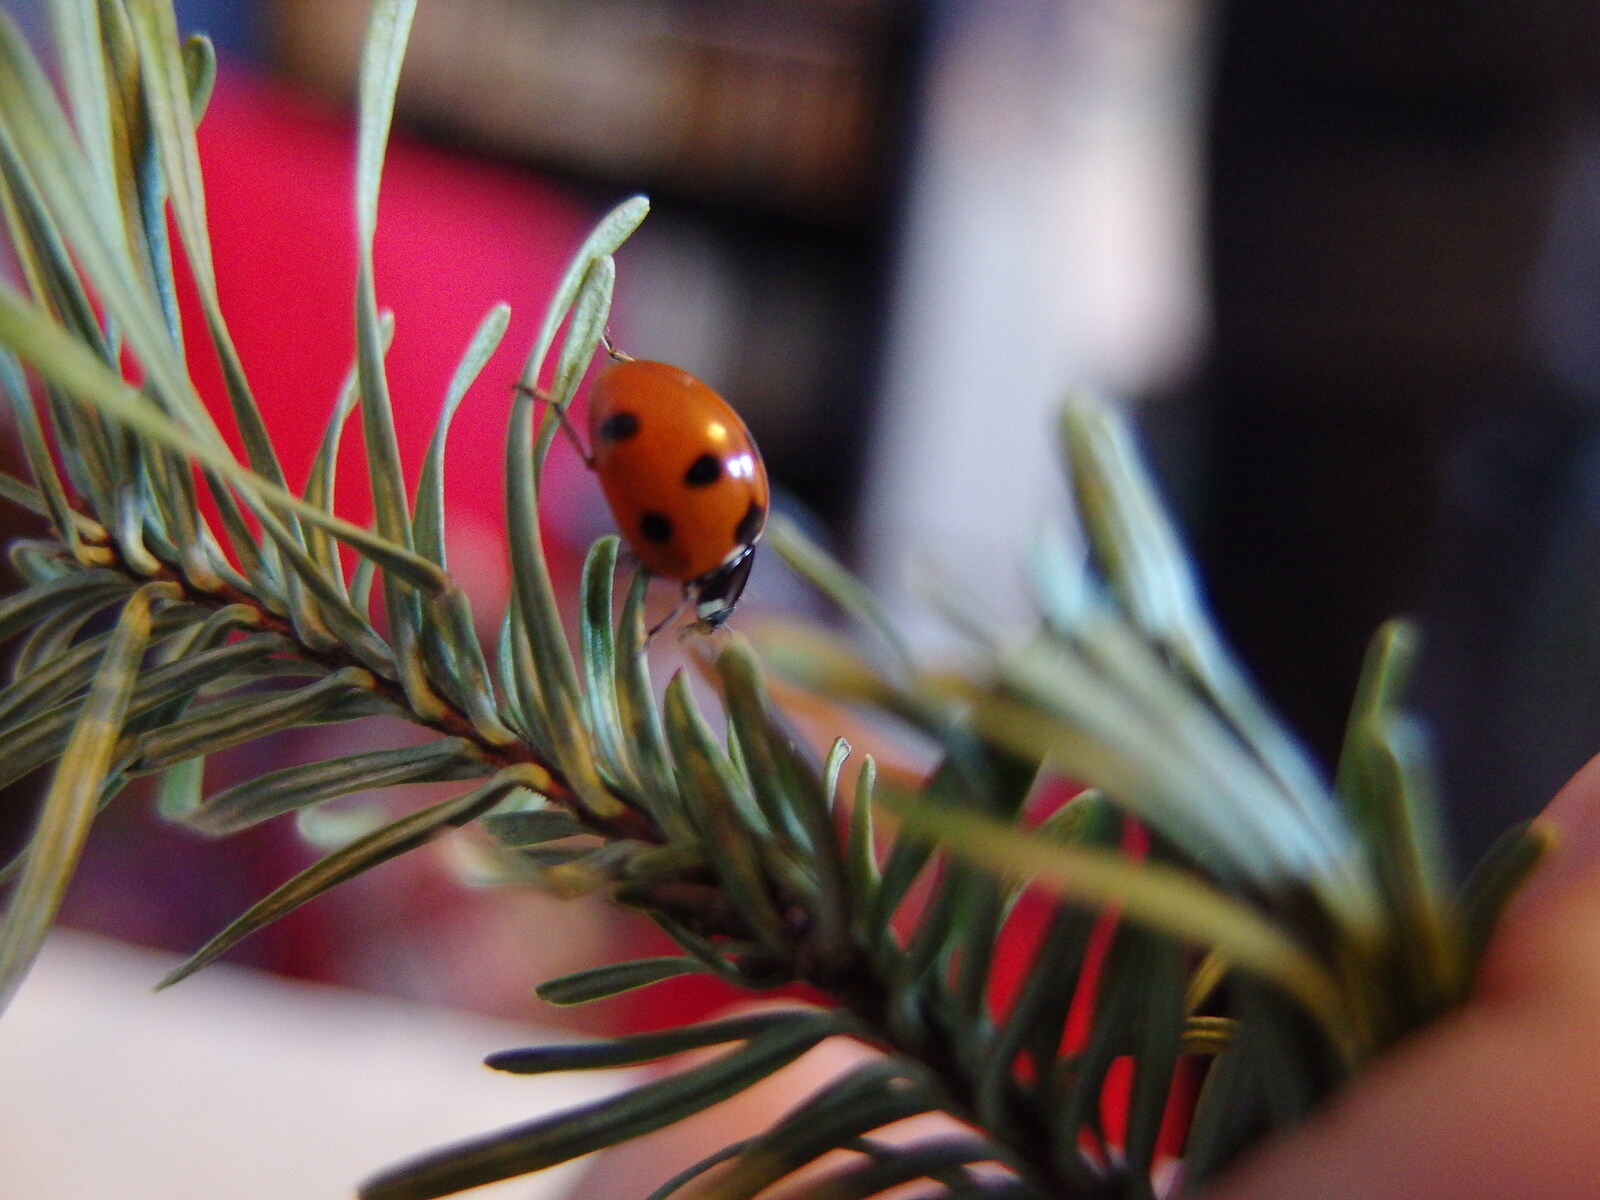 Christmas trees have ladybirds living in them from Dun Laoghaire and an Electrical Disaster, Monkstown, County Dublin, Ireland - 4th January 2014